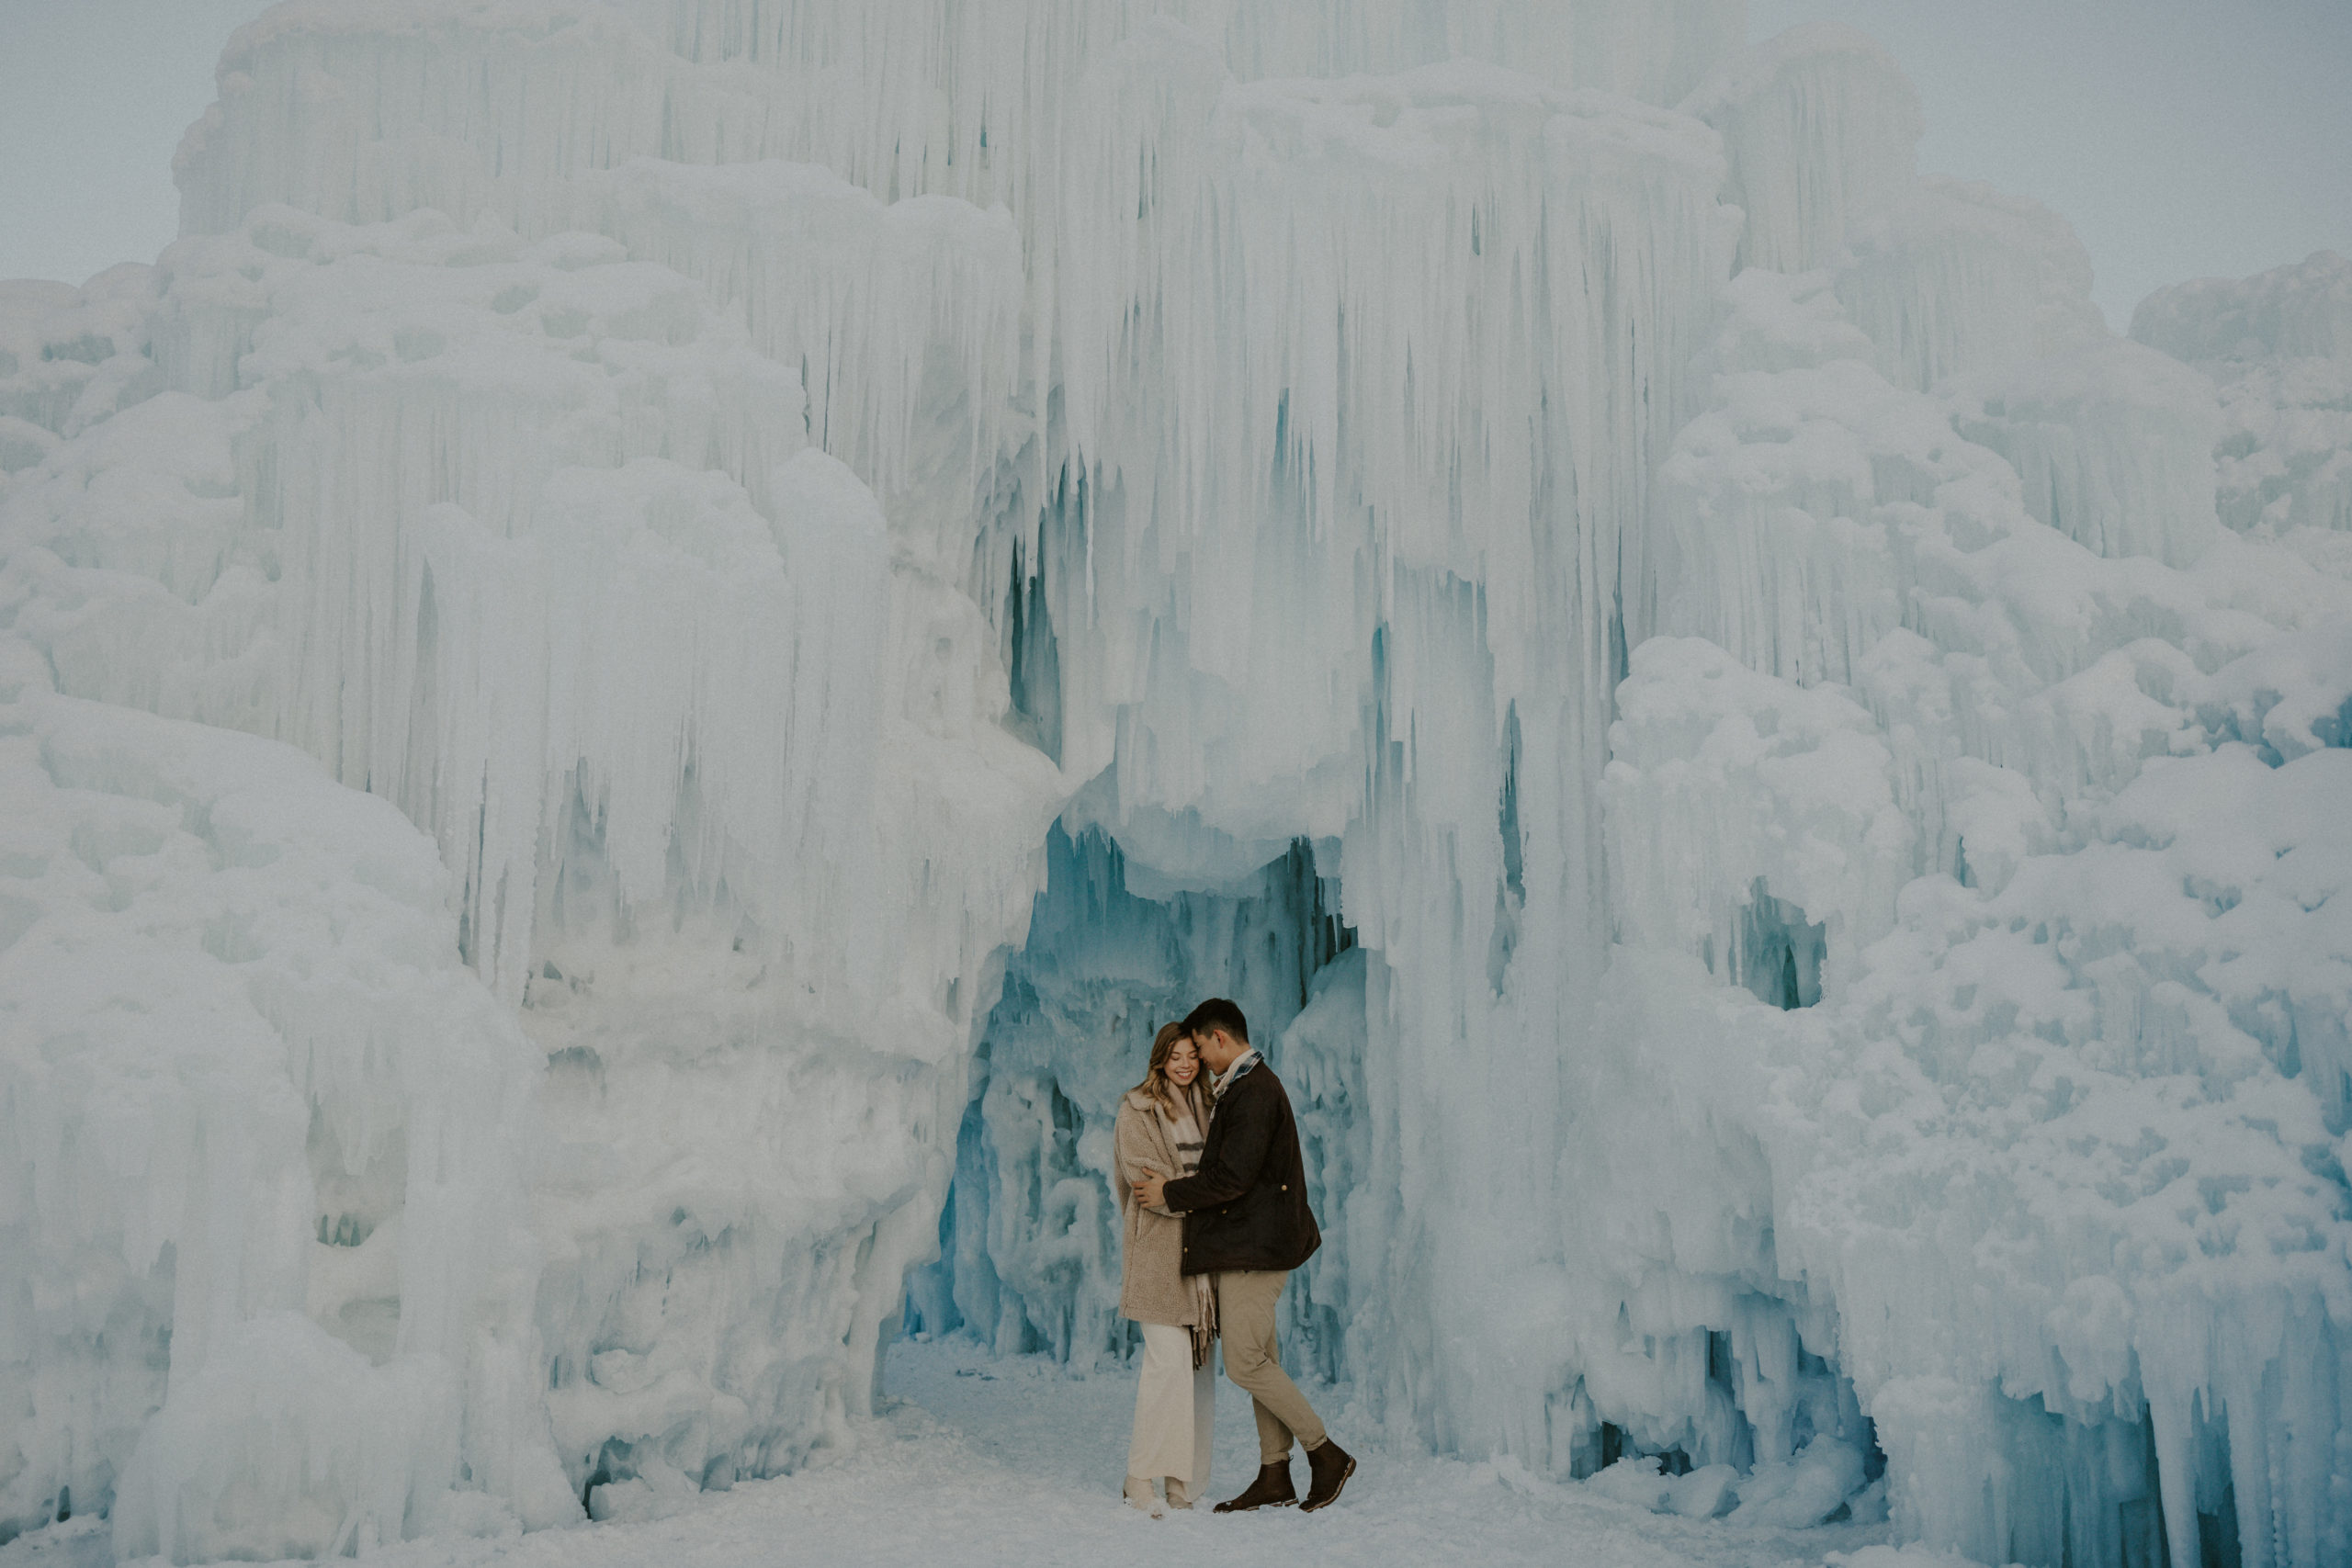 Josh and Kristen’s adventerous winter couples session at the beautifully hand crafted ice castles near Salt Lake City, Utah. Needless to say, breathtaking!